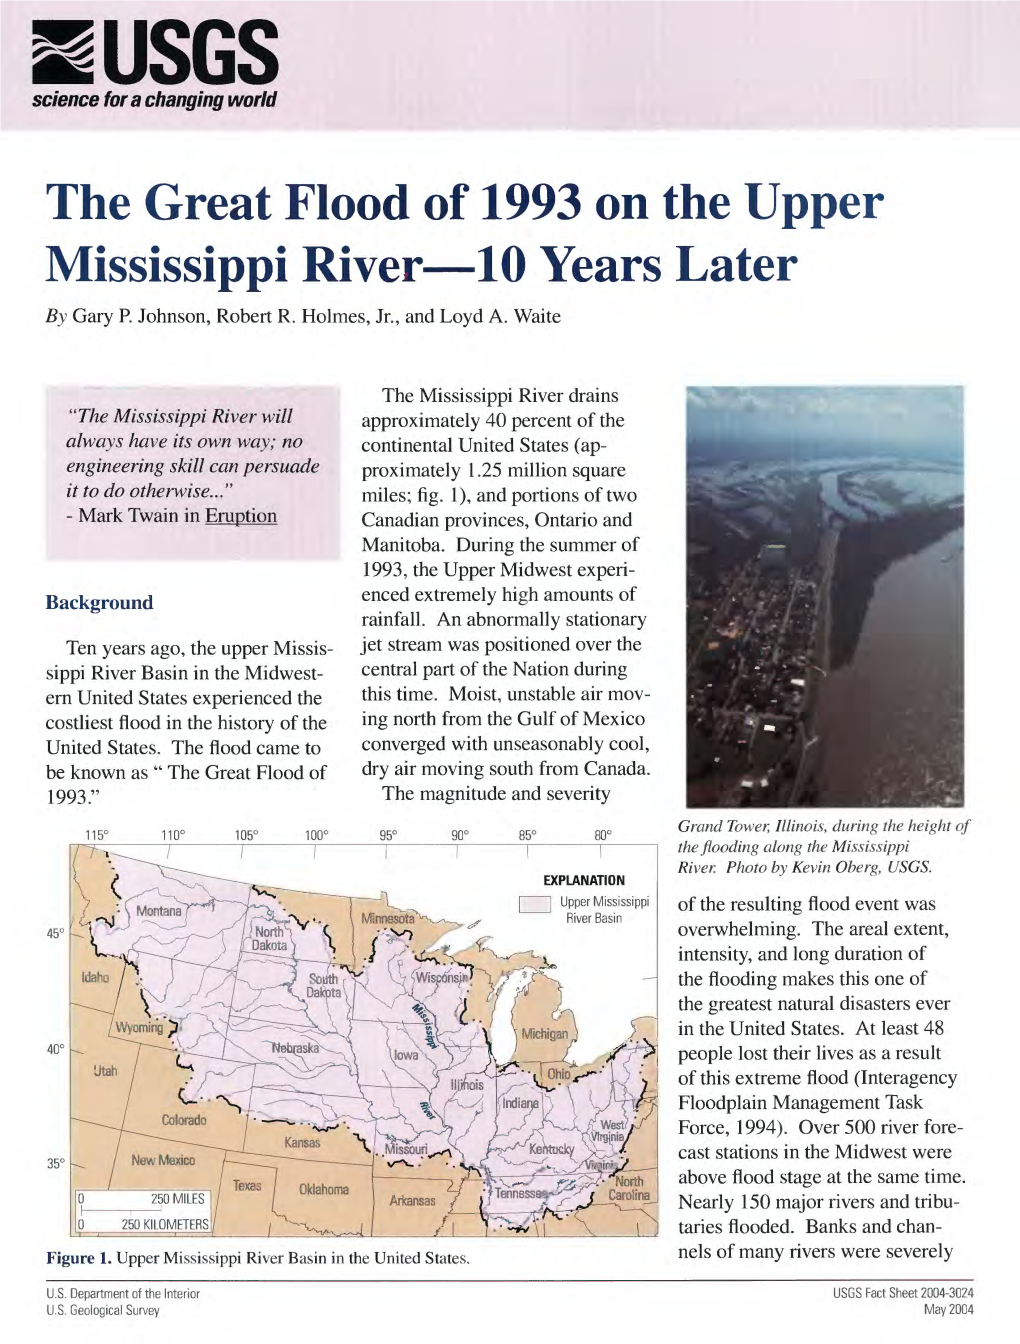 The Great Flood of 1993 on the Upper Mississippi River 10 Years Later by Gary P